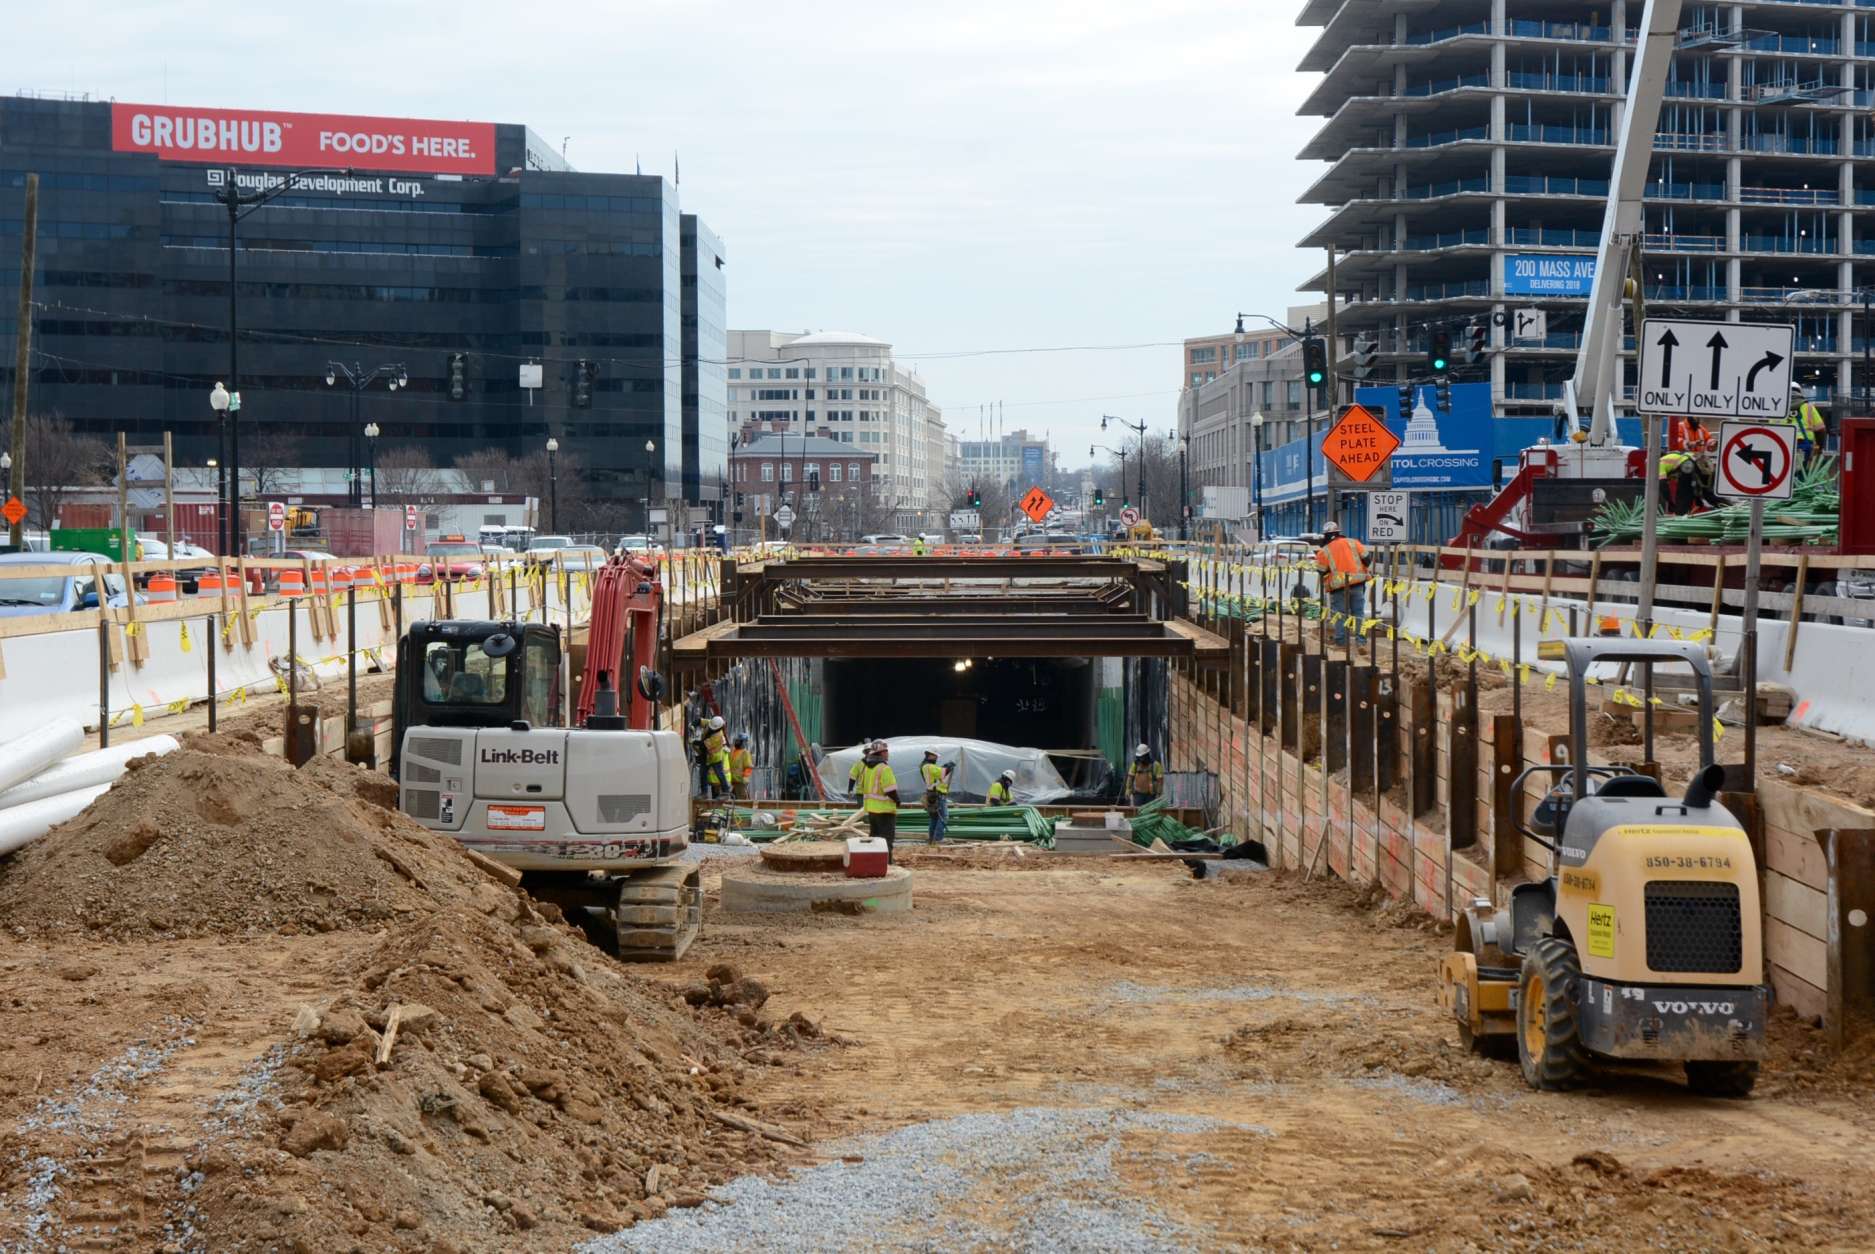 The tunnel will route eastbound drivers on Massachusetts Avenue directly into the southbound 3rd Street Tunnel. (WTOP/Dave Dildine)